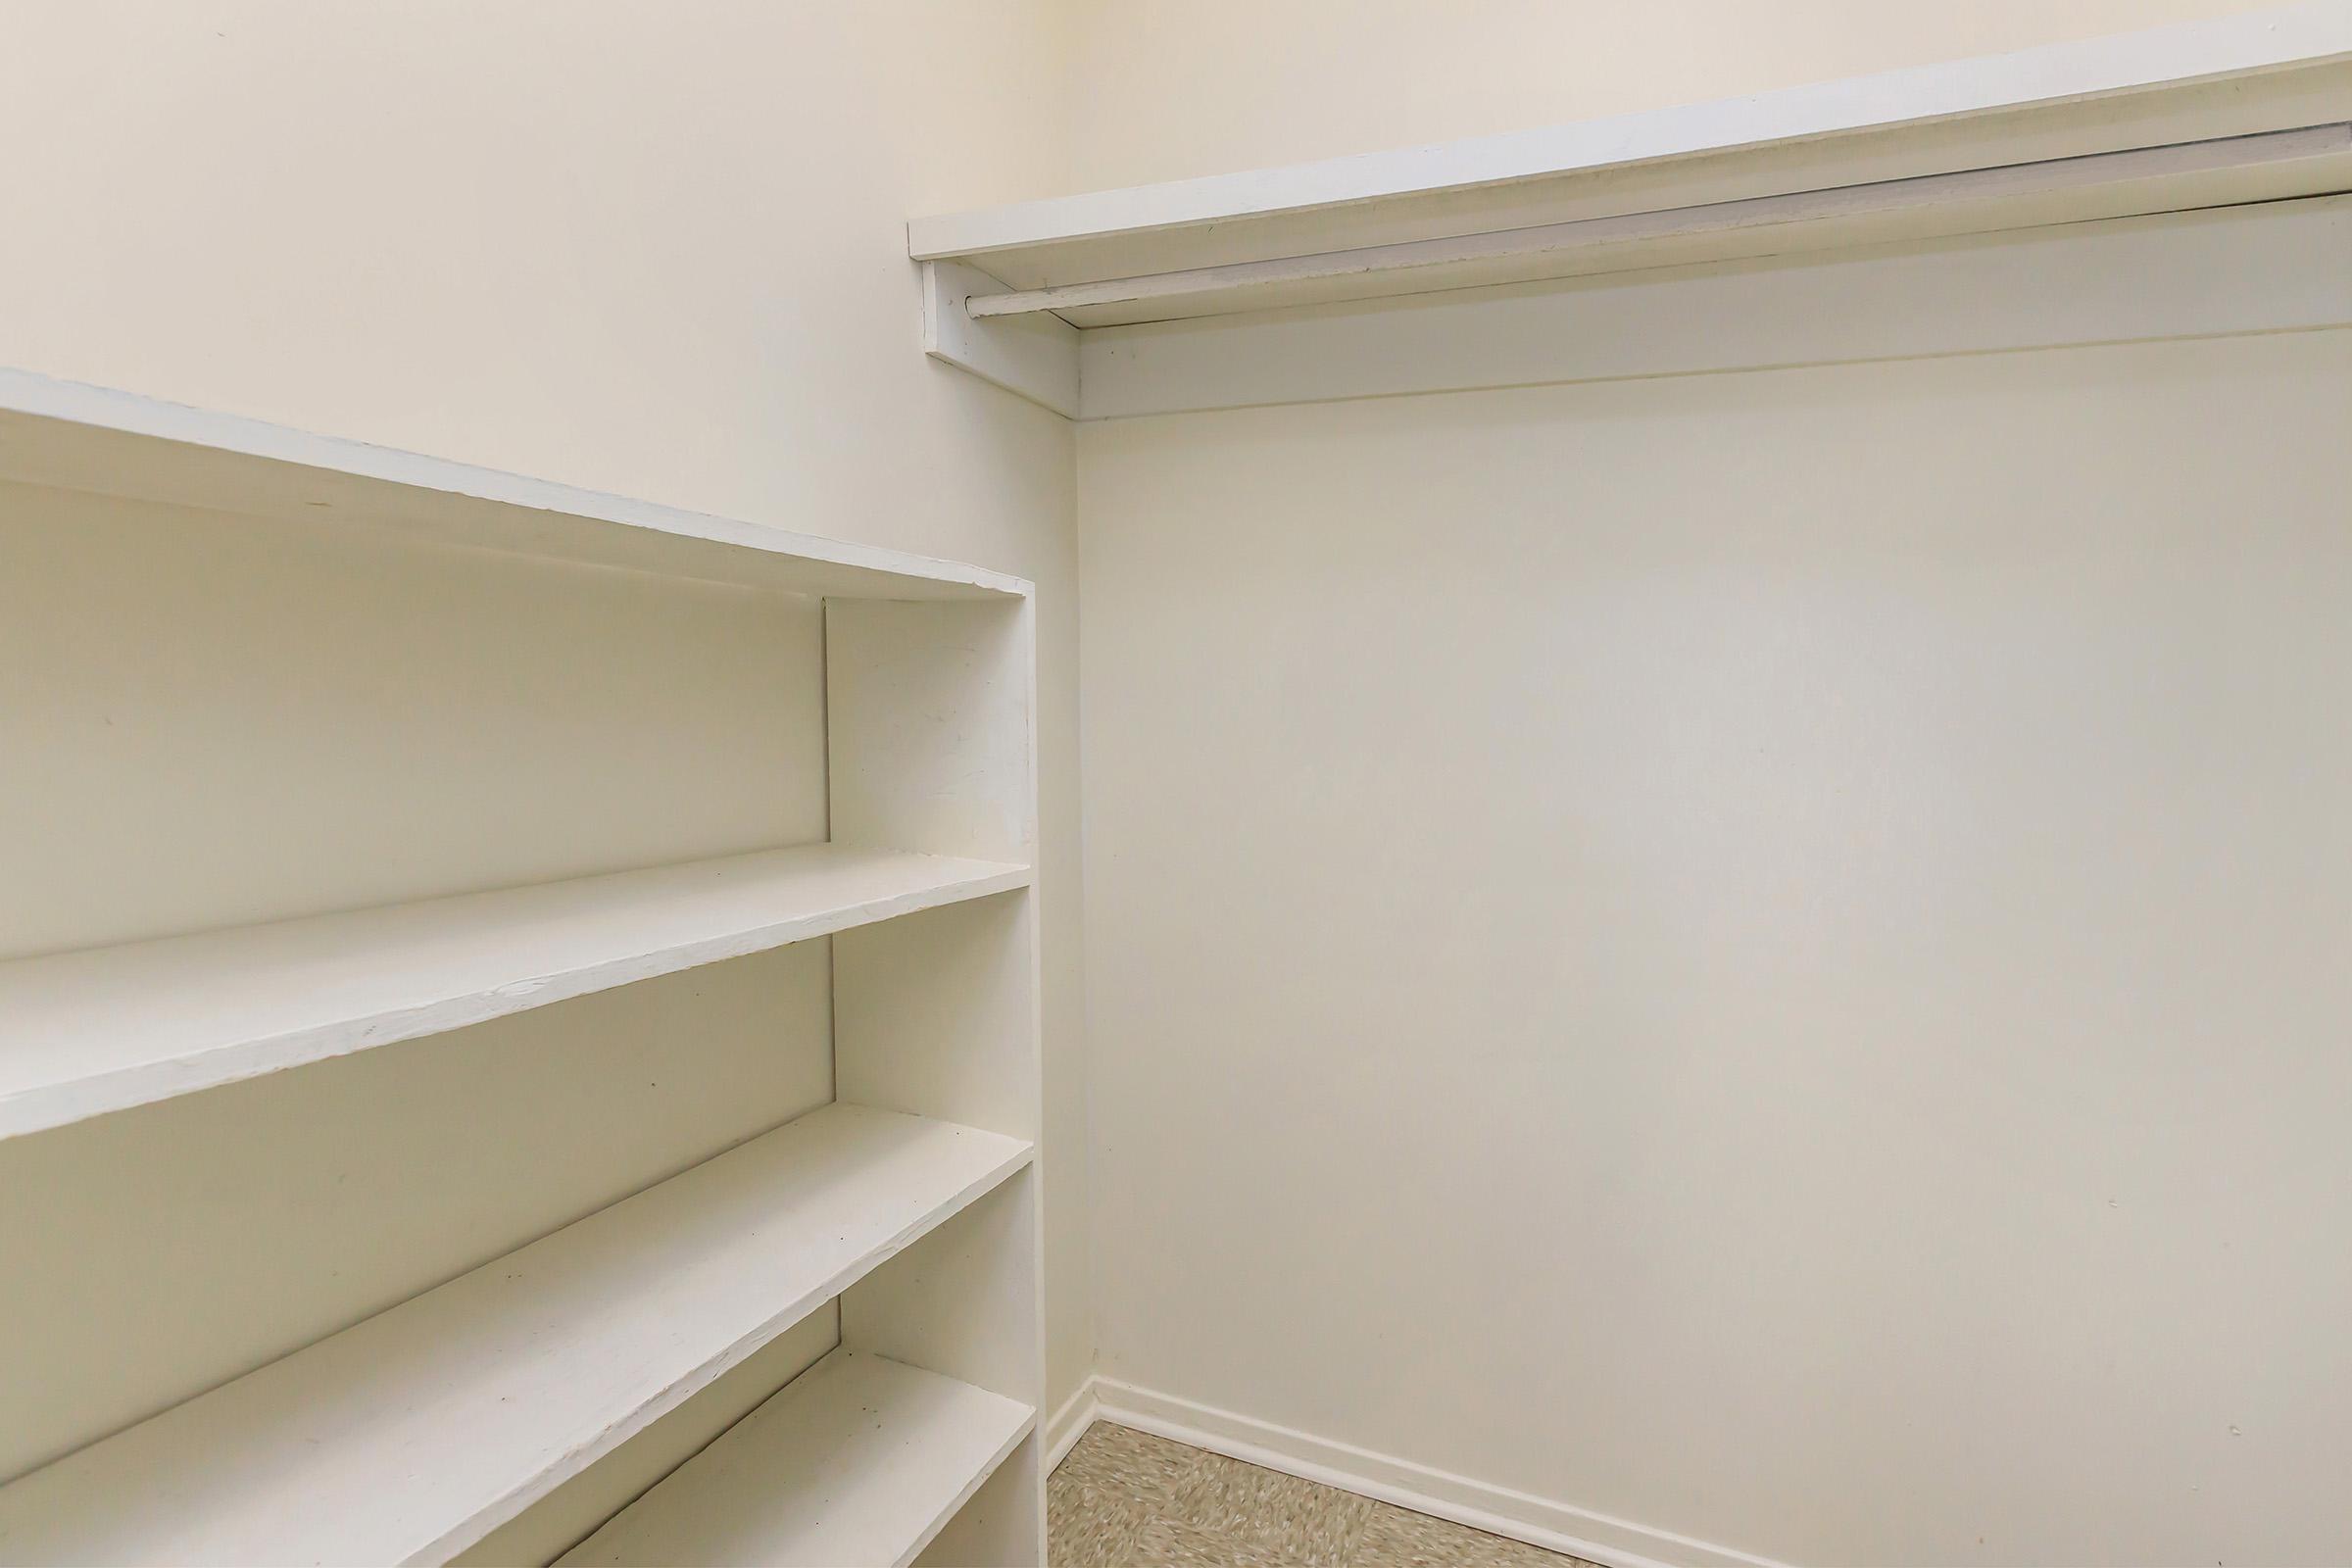 LARGE CLOSETS WITH EXTRA STORAGE SHELVES